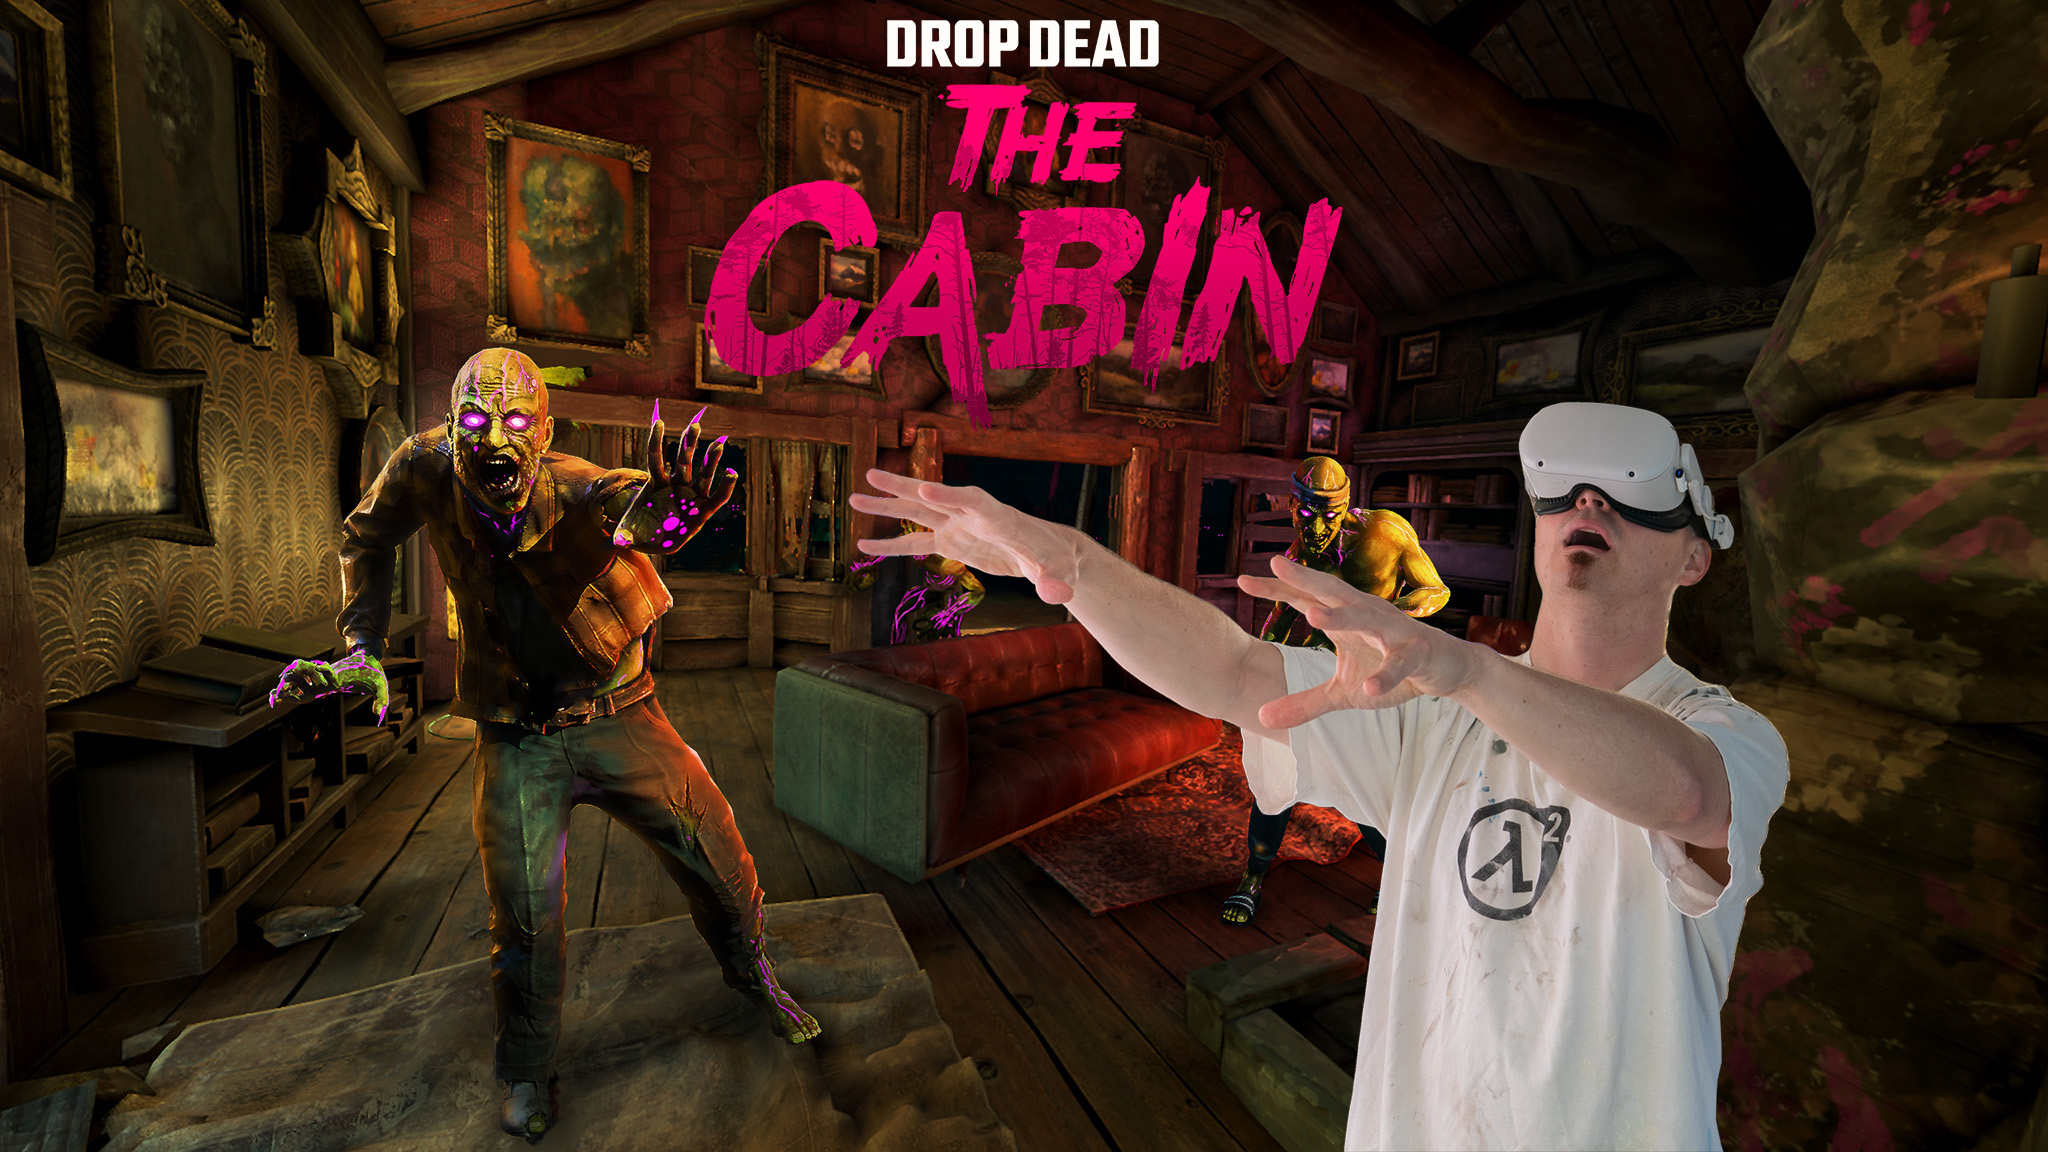 Drop Dead: The Cabin screenshot with me superimposed in it as a zombie